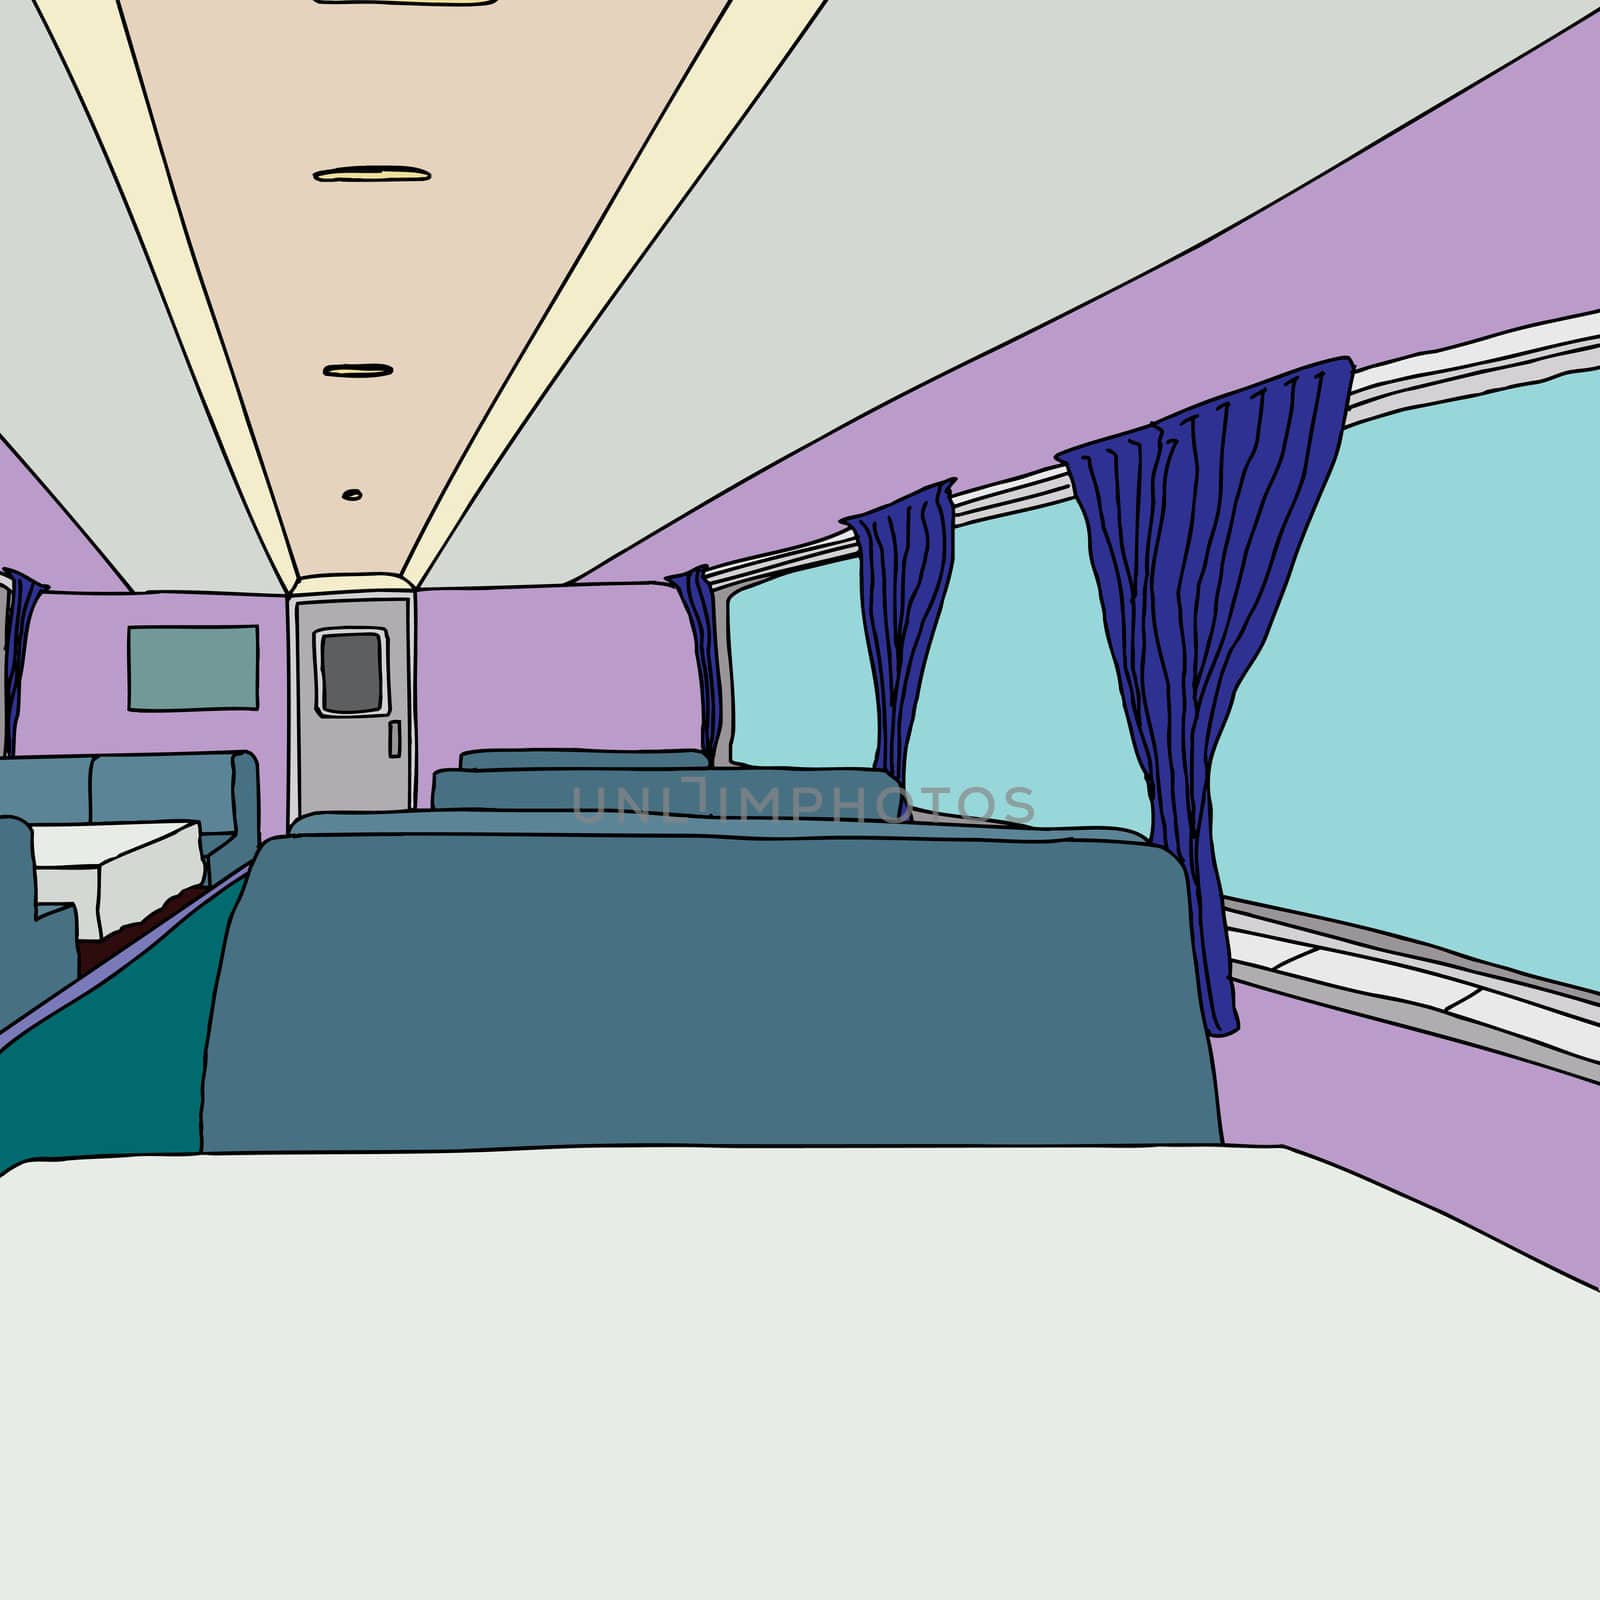 Dining Car with Large Windows by TheBlackRhino